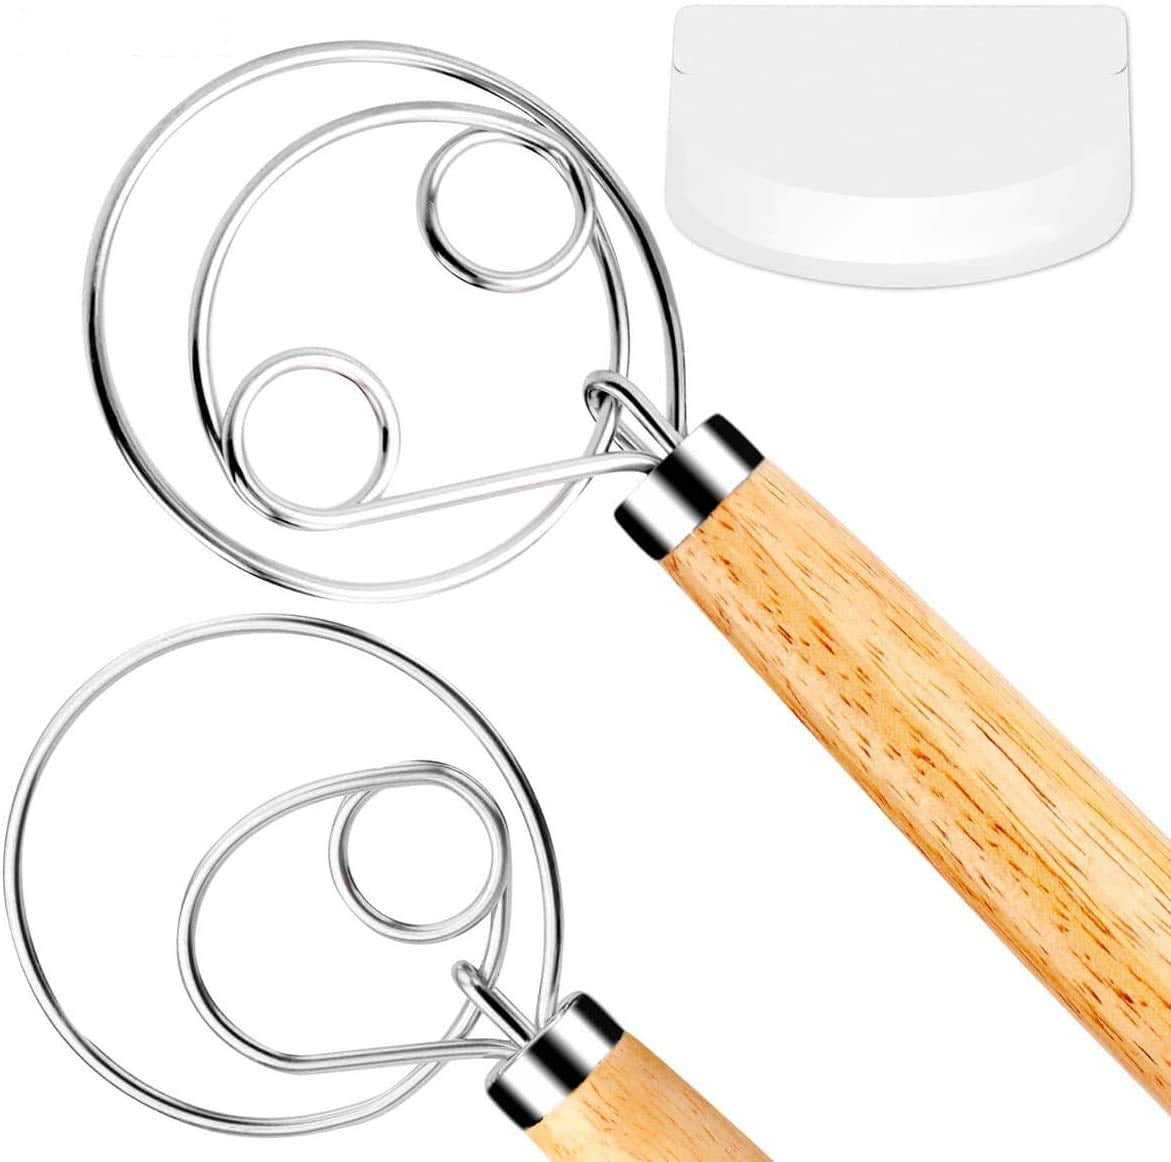 2 pack 13.5 inch Danish Dough Whisk Stainless Steel Dutch Style Bread Dough whisk for pastry，Danish Whisk,Great alternatives to a blender mixer or hook 